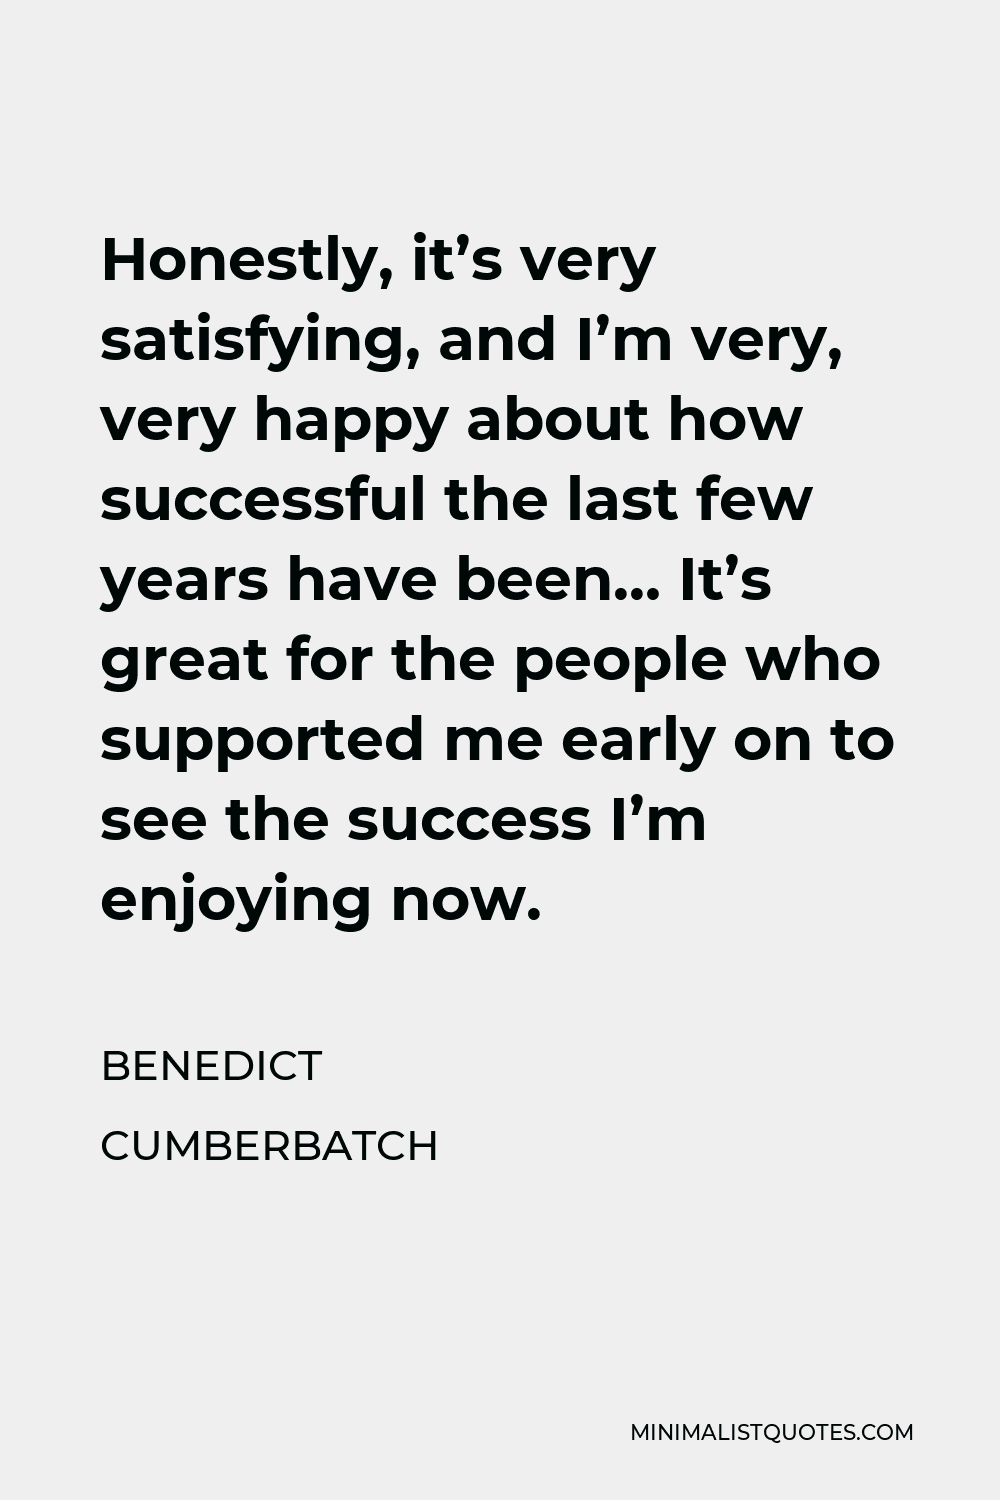 Benedict Cumberbatch Quote - Honestly, it’s very satisfying, and I’m very, very happy about how successful the last few years have been… It’s great for the people who supported me early on to see the success I’m enjoying now.